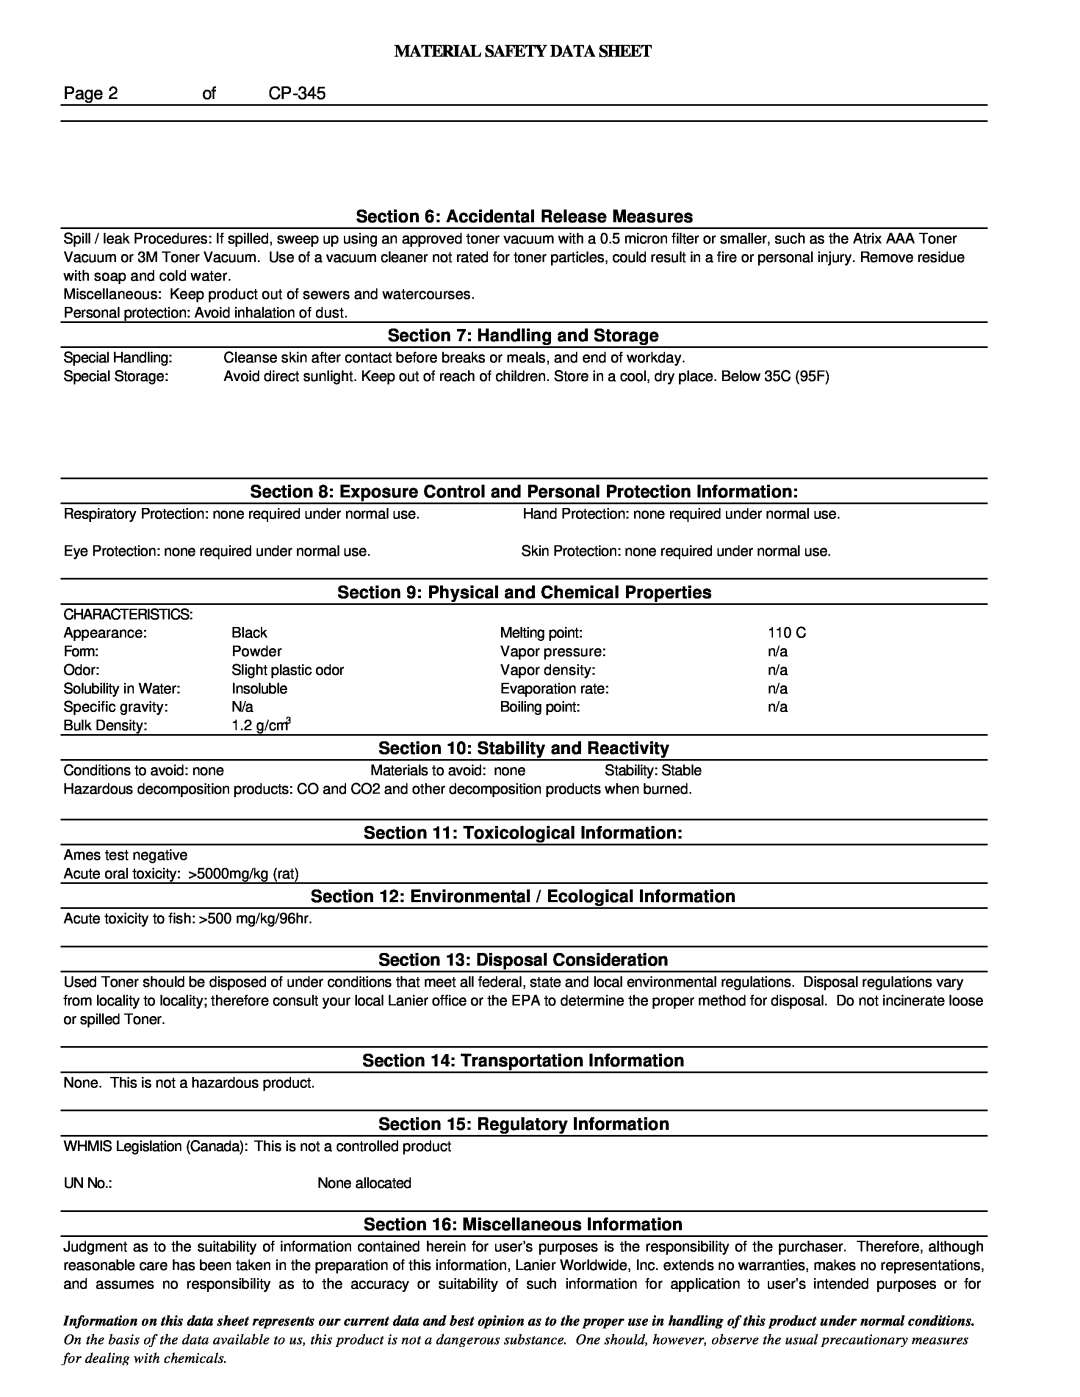 Lanier 480-0066 manual Material Safety Data Sheet, Accidental Release Measures 